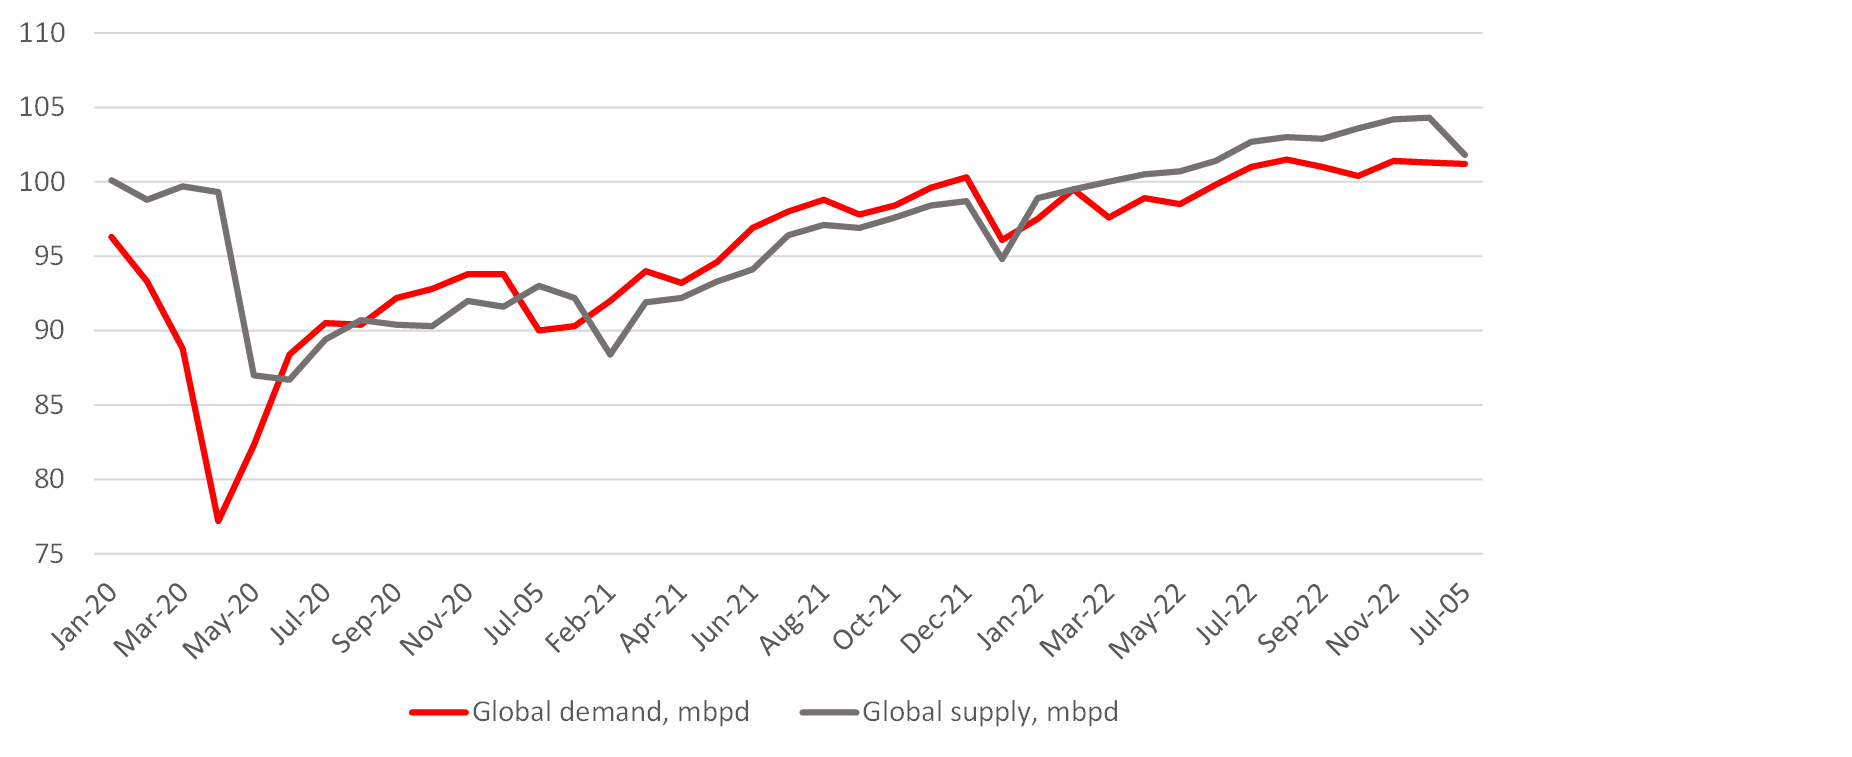 Global supply and demand trends, MMbpd